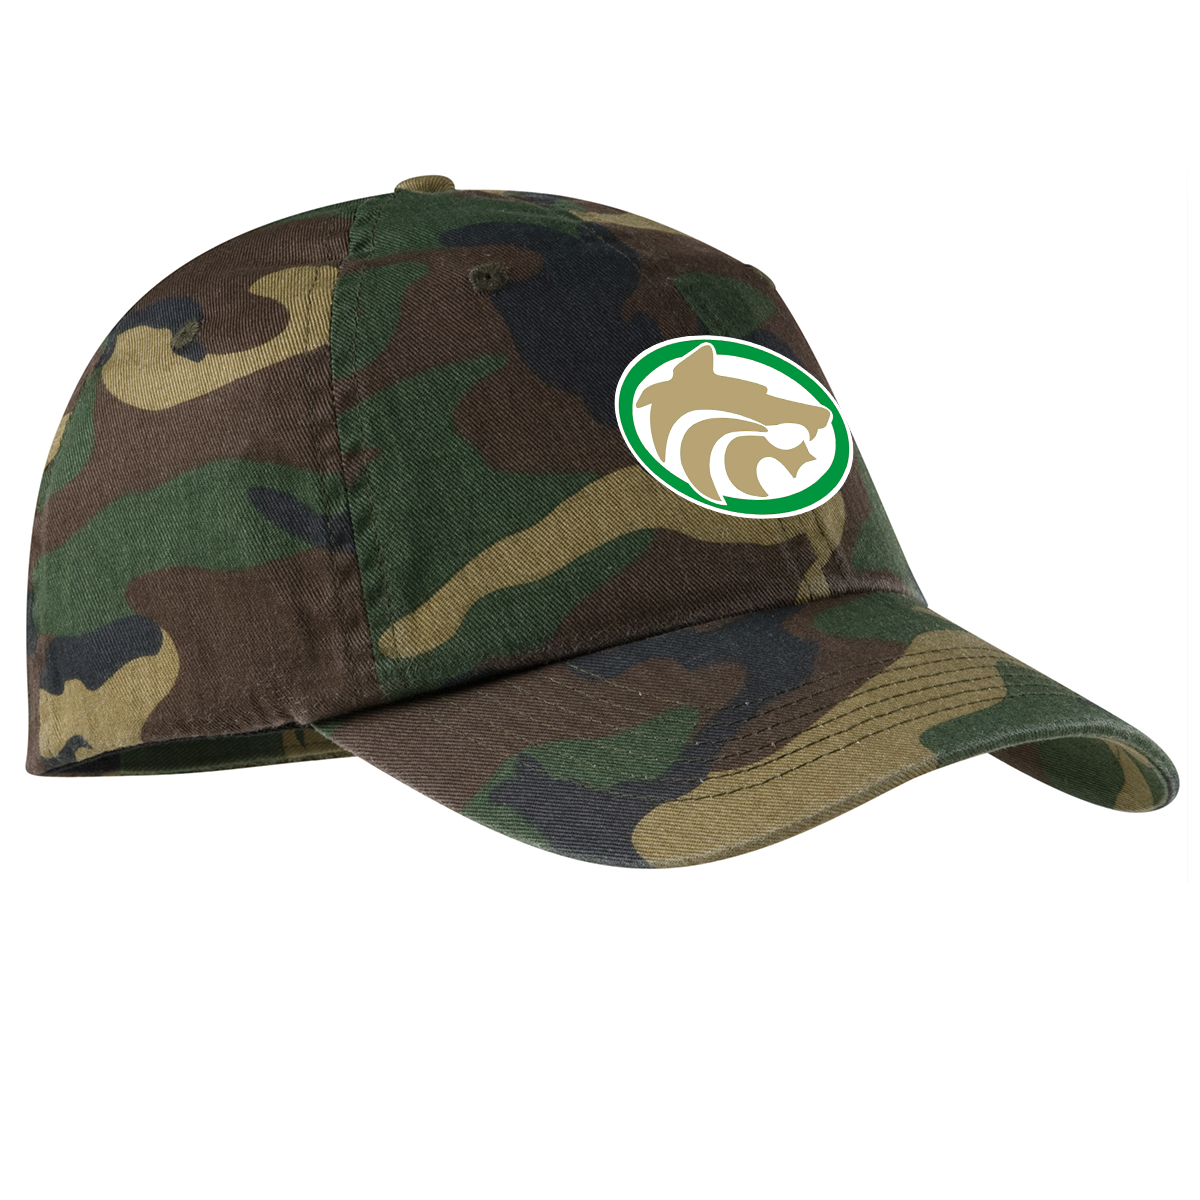 Buford Youth Lacrosse Camo Cap